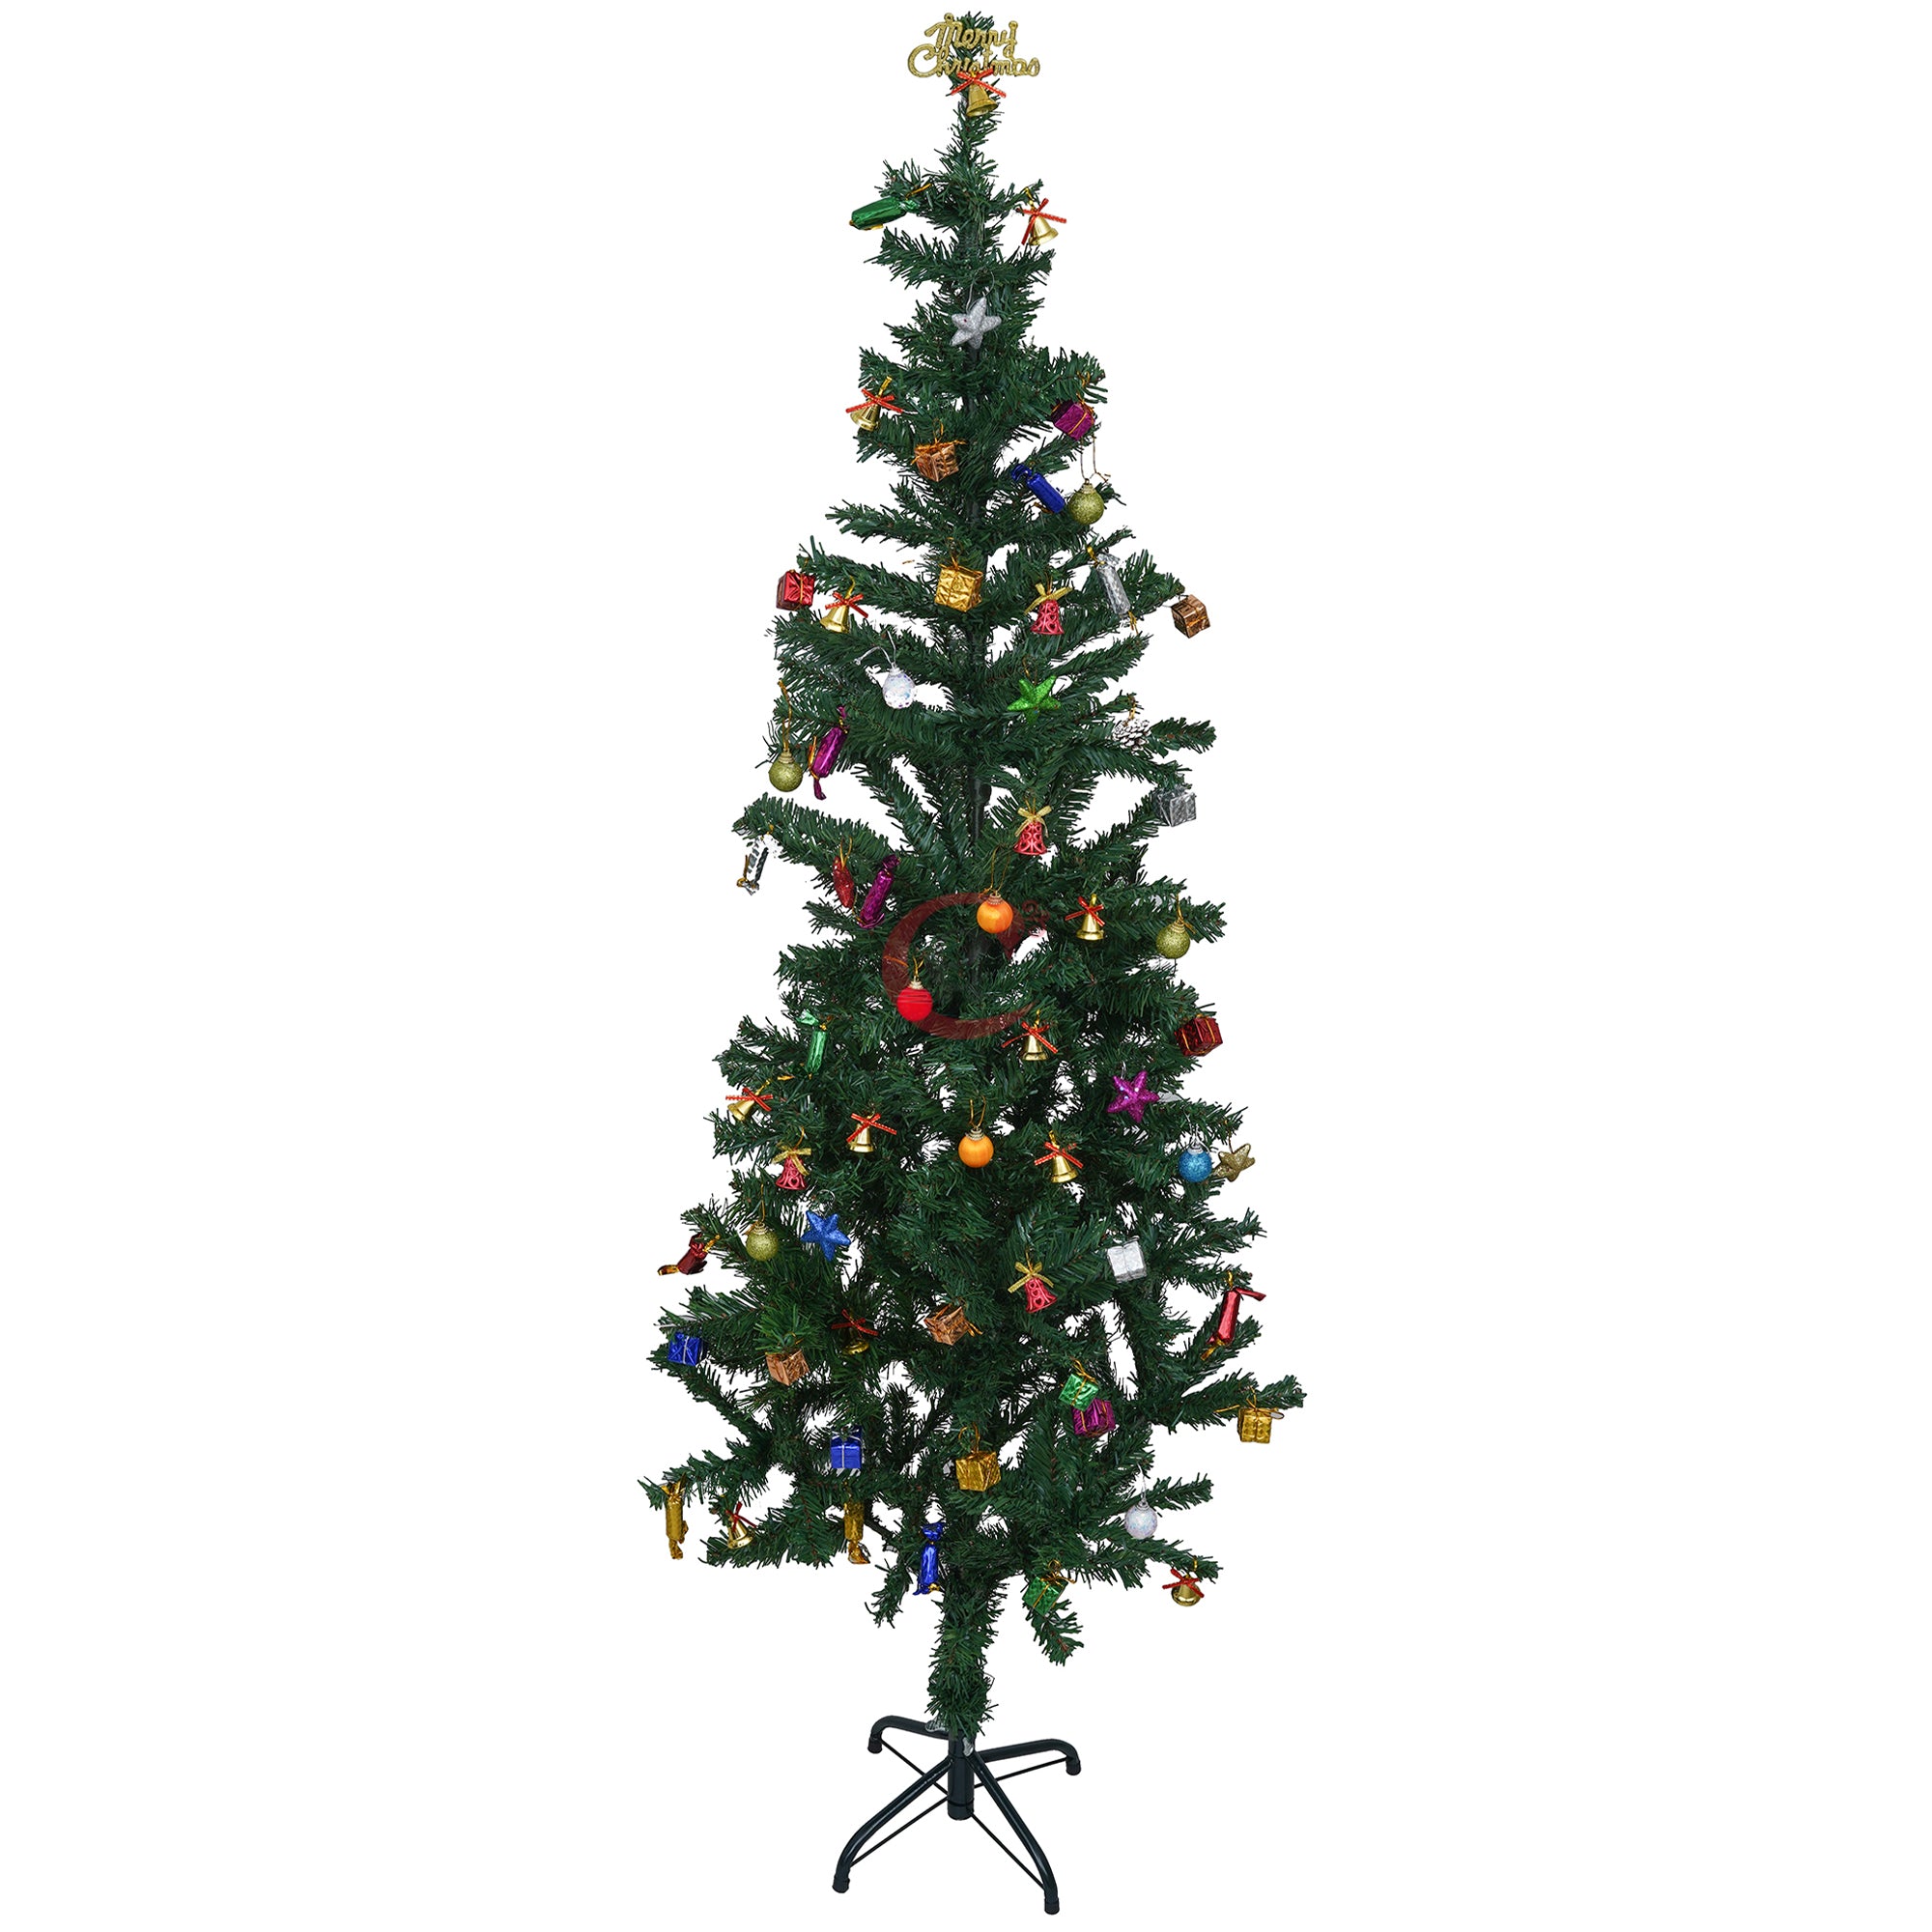 eCraftIndia 6 Feet Green Artificial Christmas Tree Xmas Pine Tree with Metal Stand - Xmas Tree for Indoor, Outdoor, Home, Living Room, Office, Church Decor - Merry Christmas Decoration Item 8